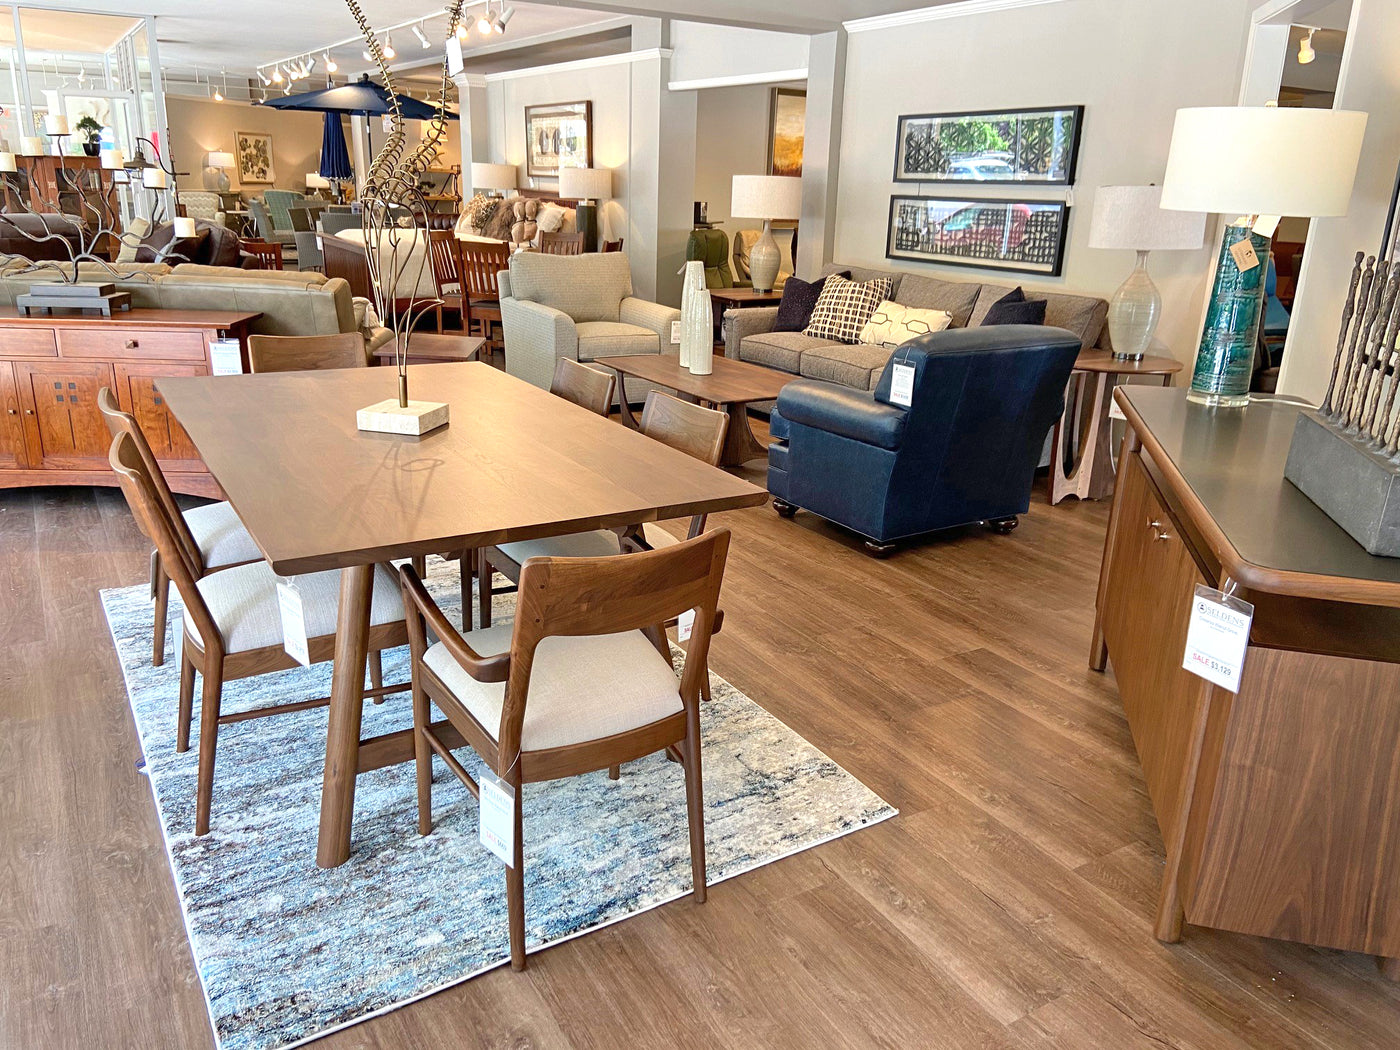 A dining room and living room setup in the Seldens furniture showroom in Olympia, Washington.